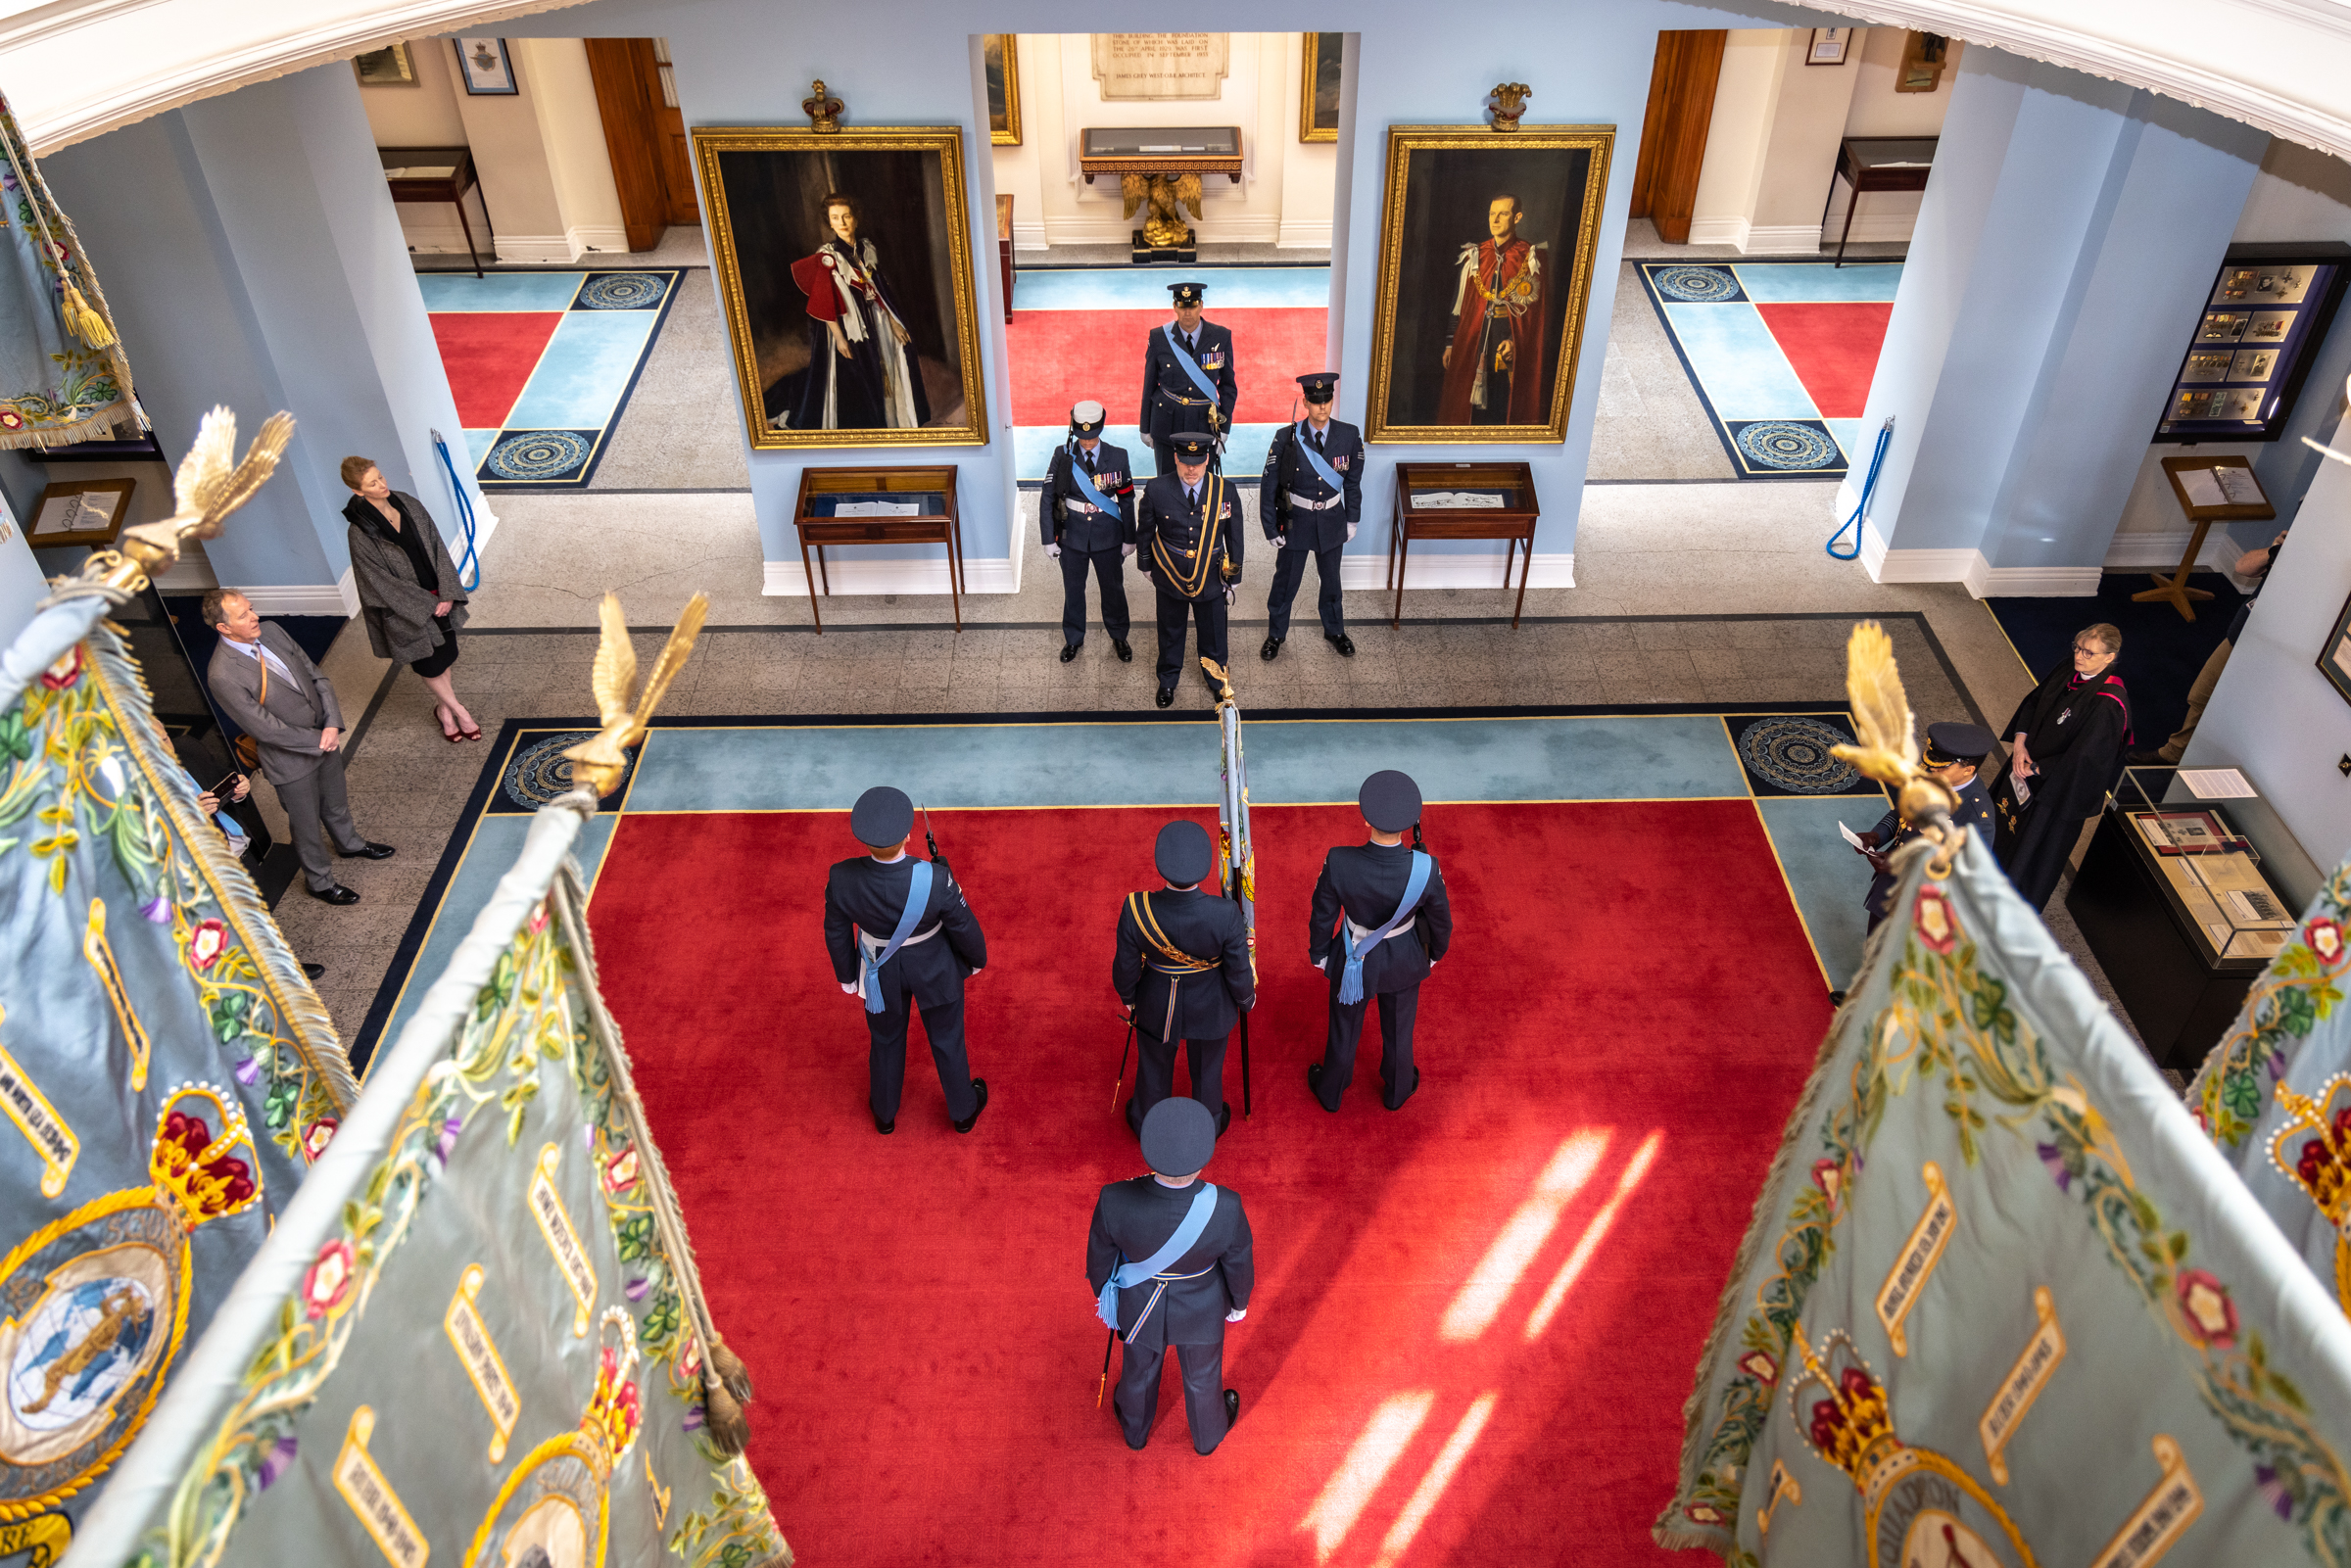 Image shows above shot of RAF aviators standing inside Officers' Mess during ceremony.